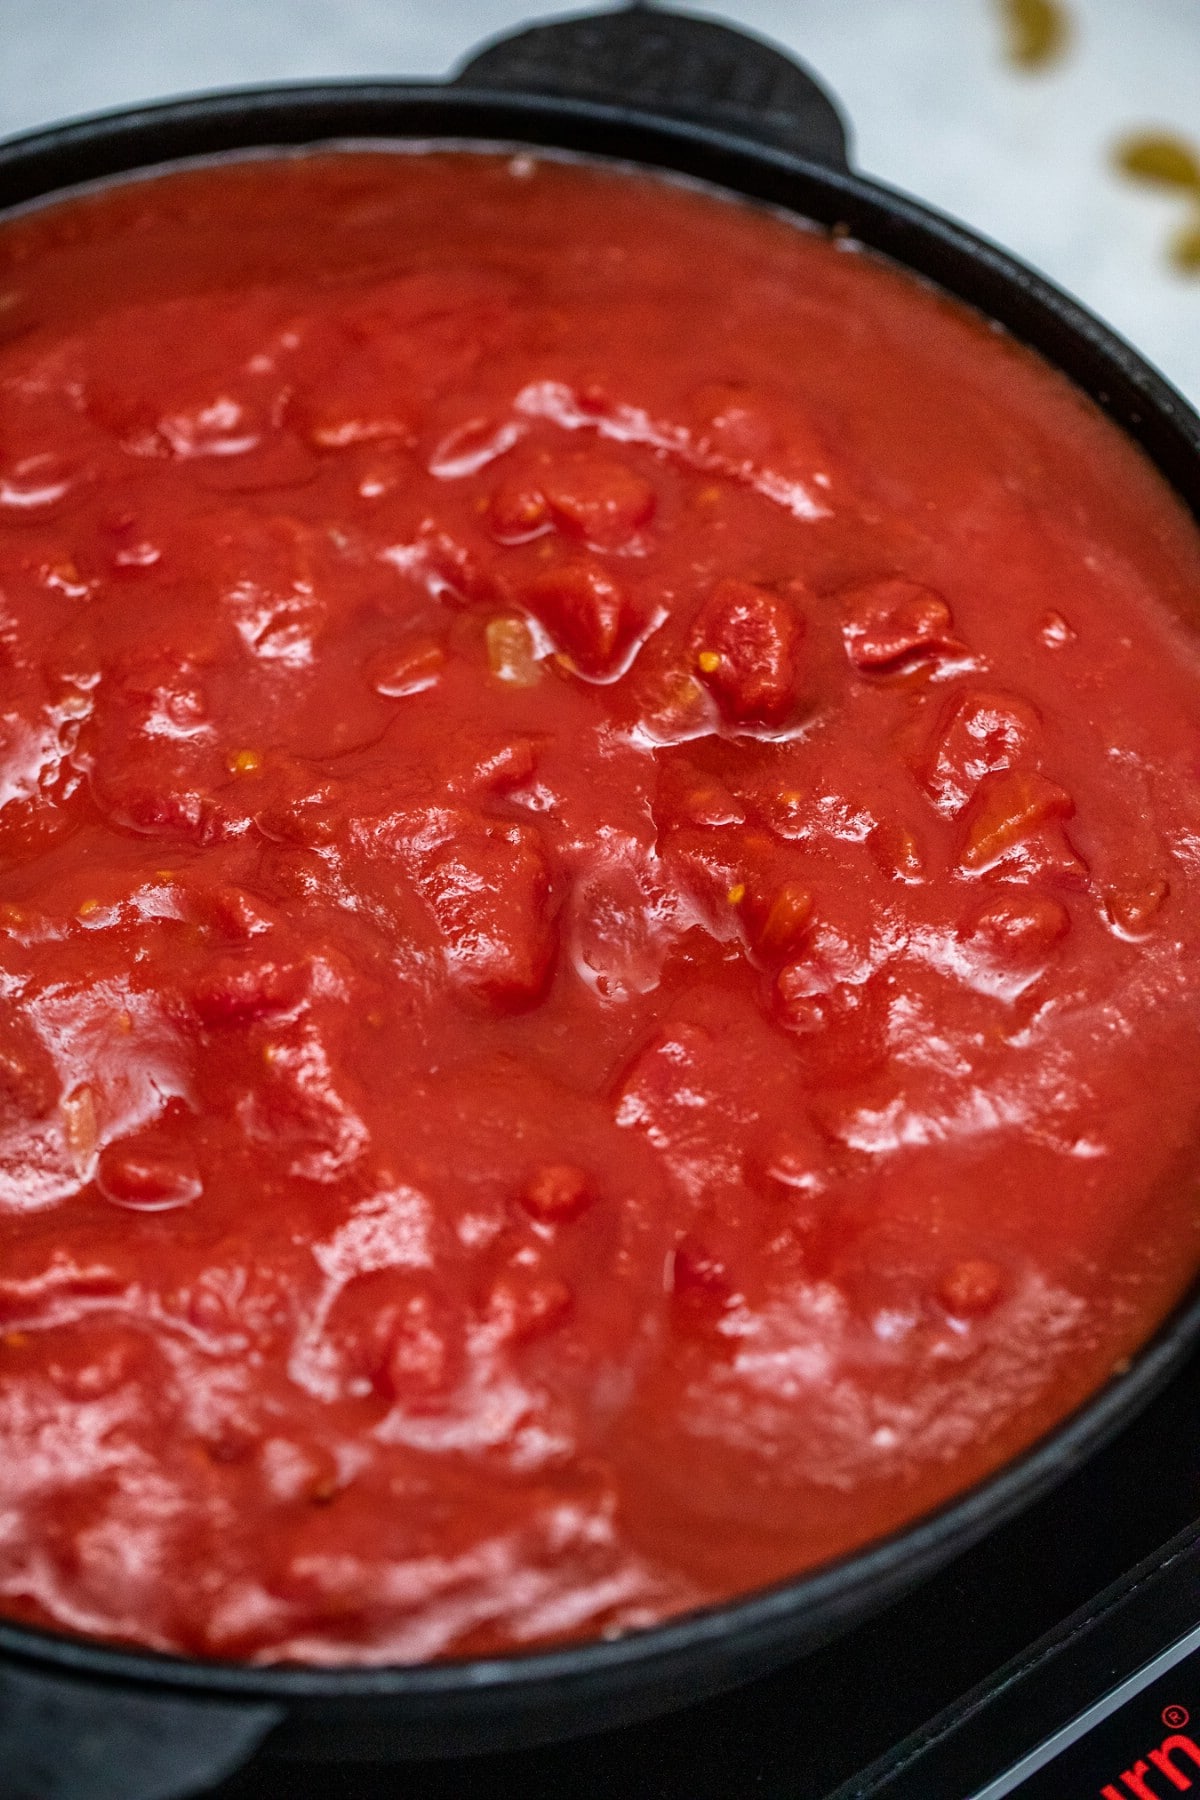 Skillet with tomato sauce